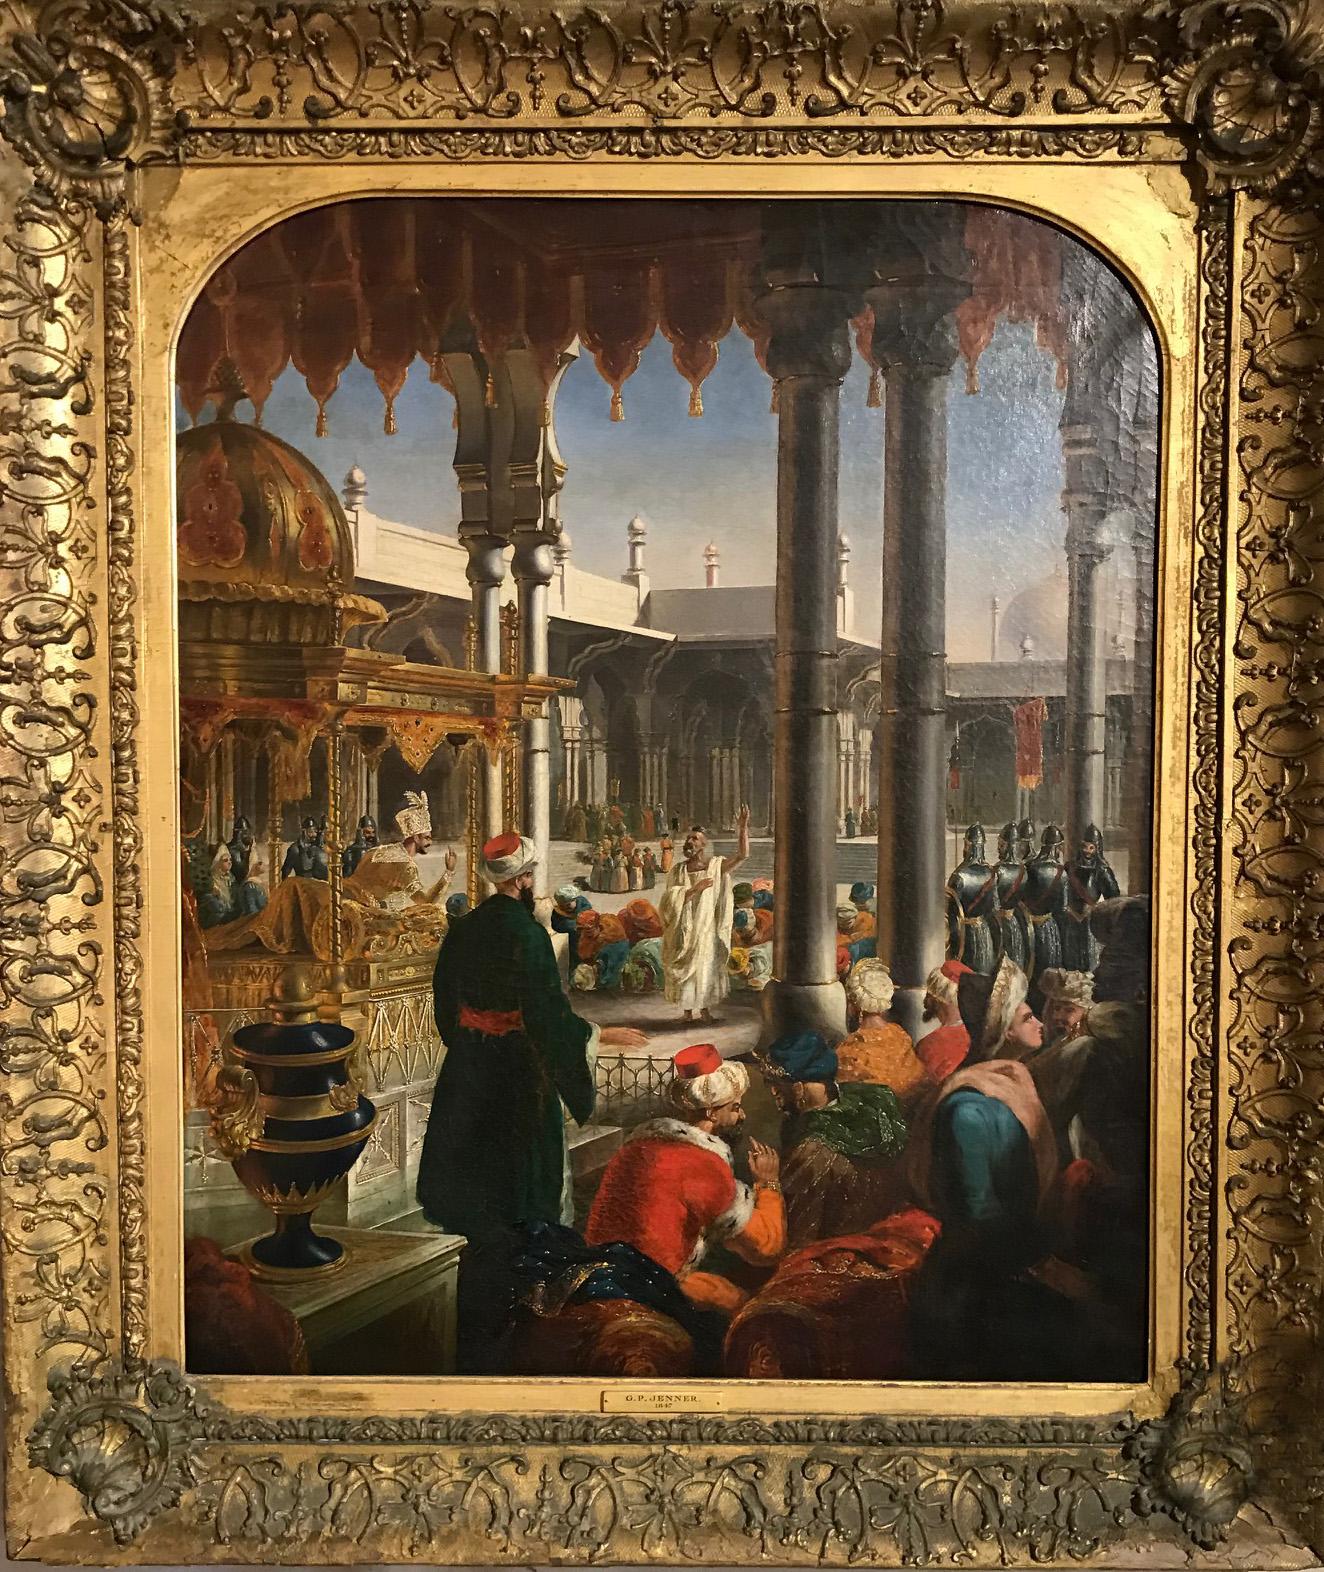 A pair of paintings by English artist, G.P. Jenner (active circa 1830-1850): Moorish Interior Scenes: Finely detailed and exquisitely
executed by the artist, one depicting a wedding and the other an orator or petitioner in a Moorish courtyard.